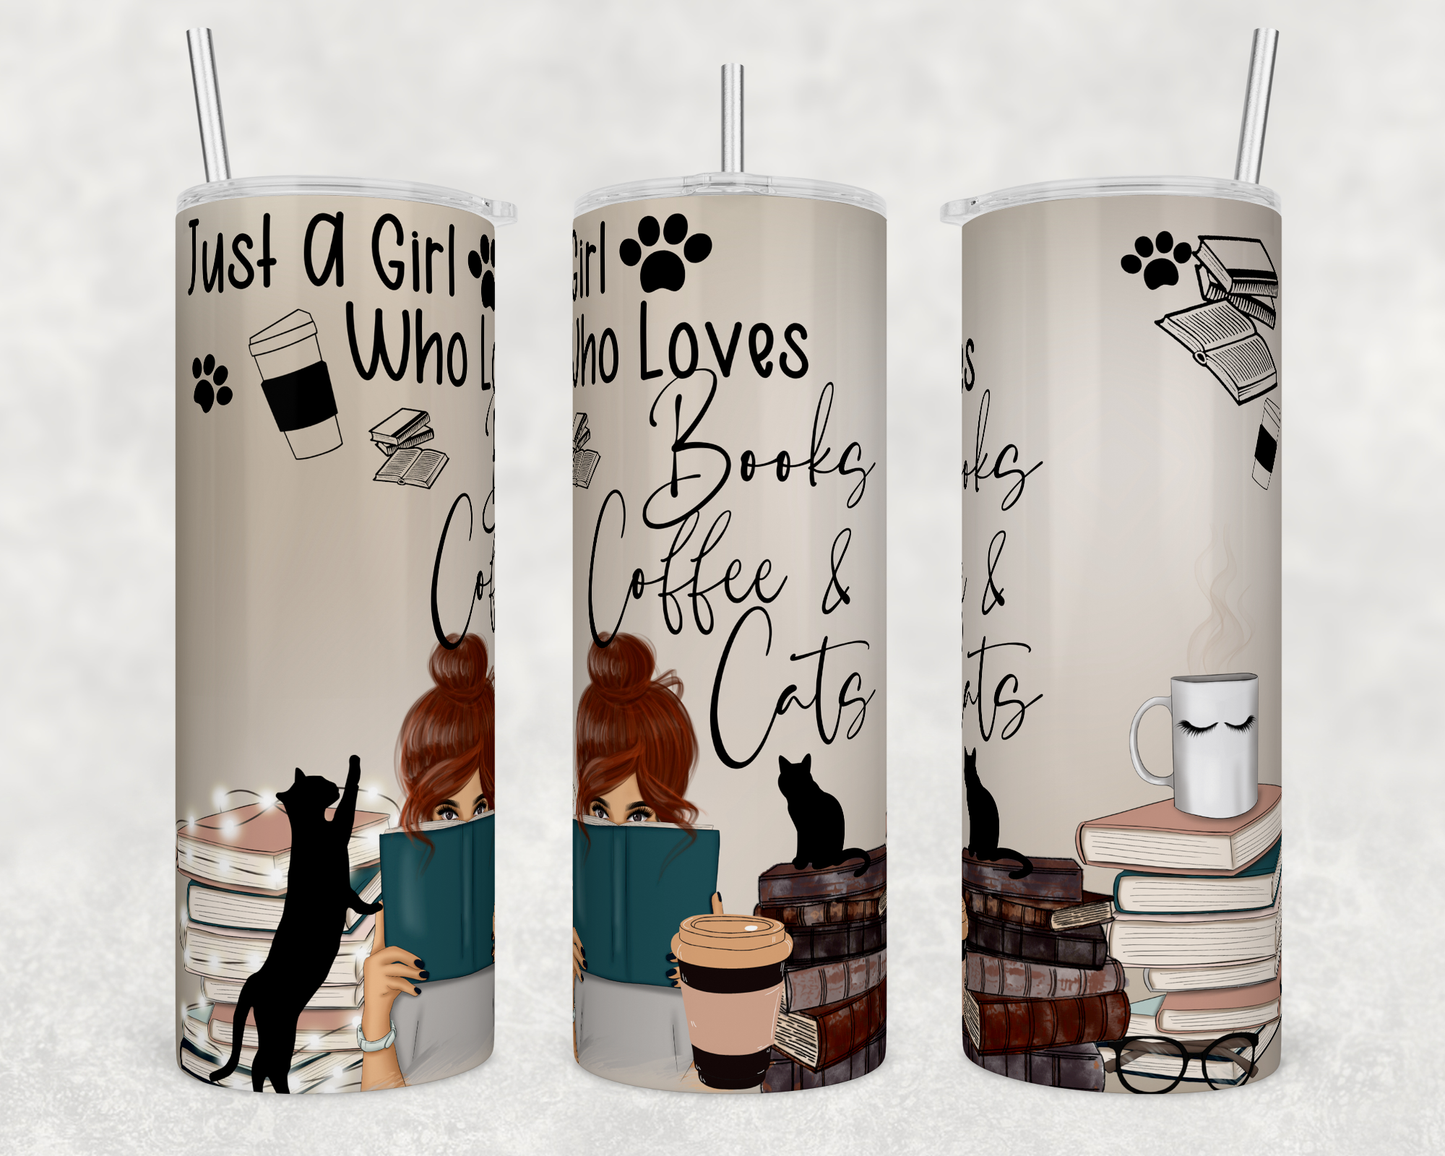 Just A Girl Who Loves Books Coffee Cats 20oz Skinny Tumbler